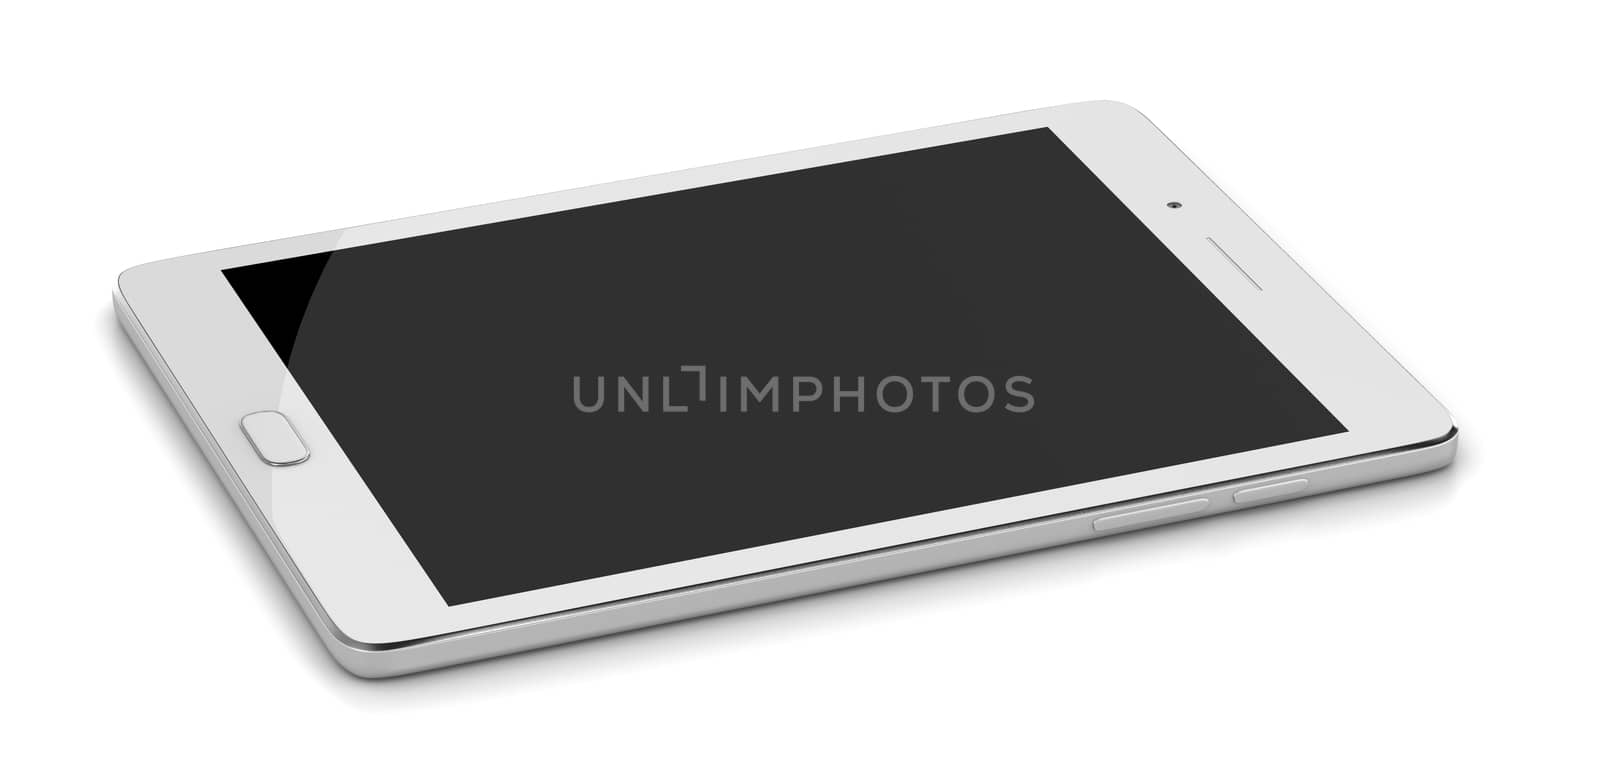 White Tablet Pc Turned Off with Blank Display on White Background 3D Illustration